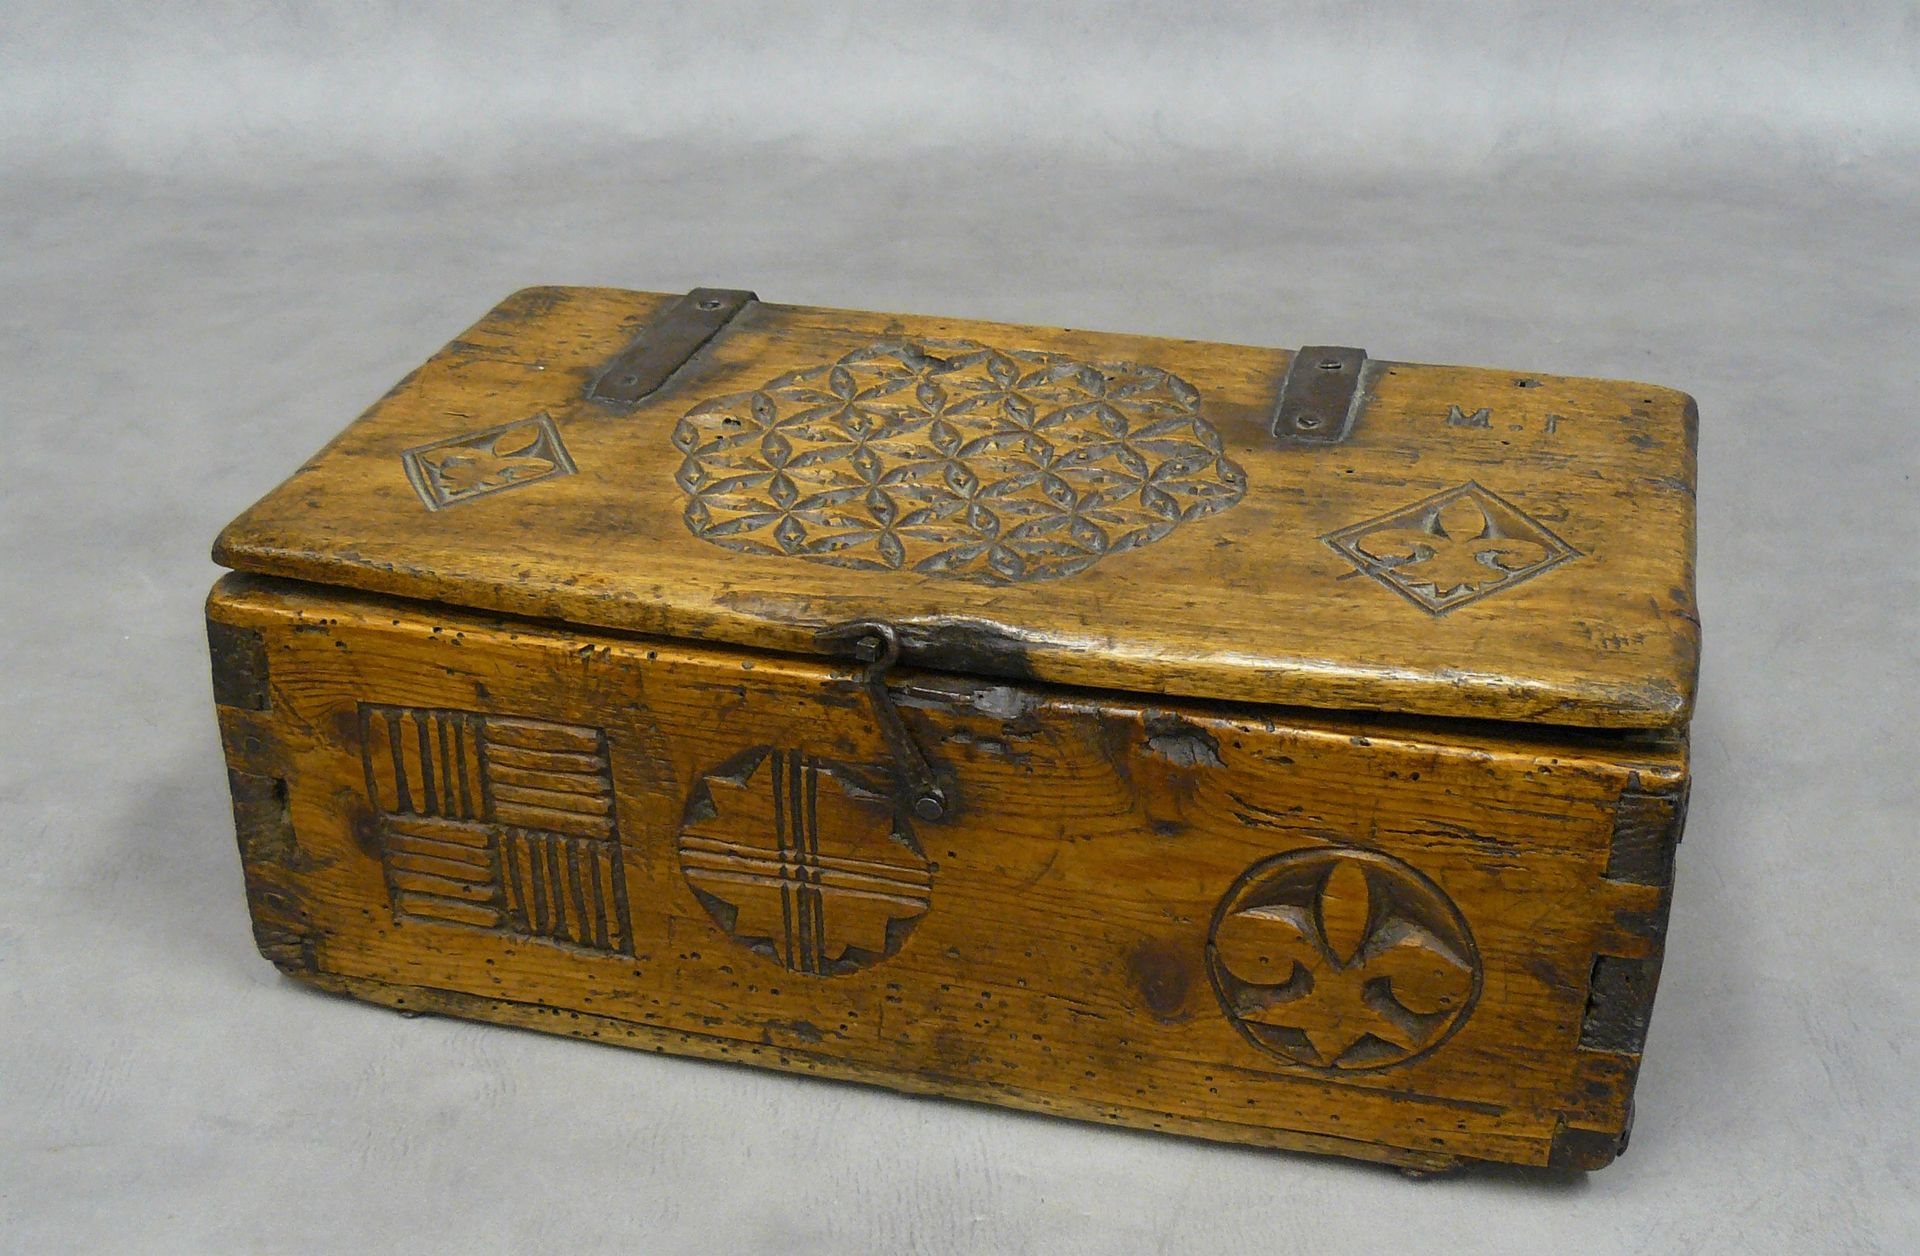 Null a wooden box carved with fleur-de-lis in lozenges and a network of rosettes&hellip;